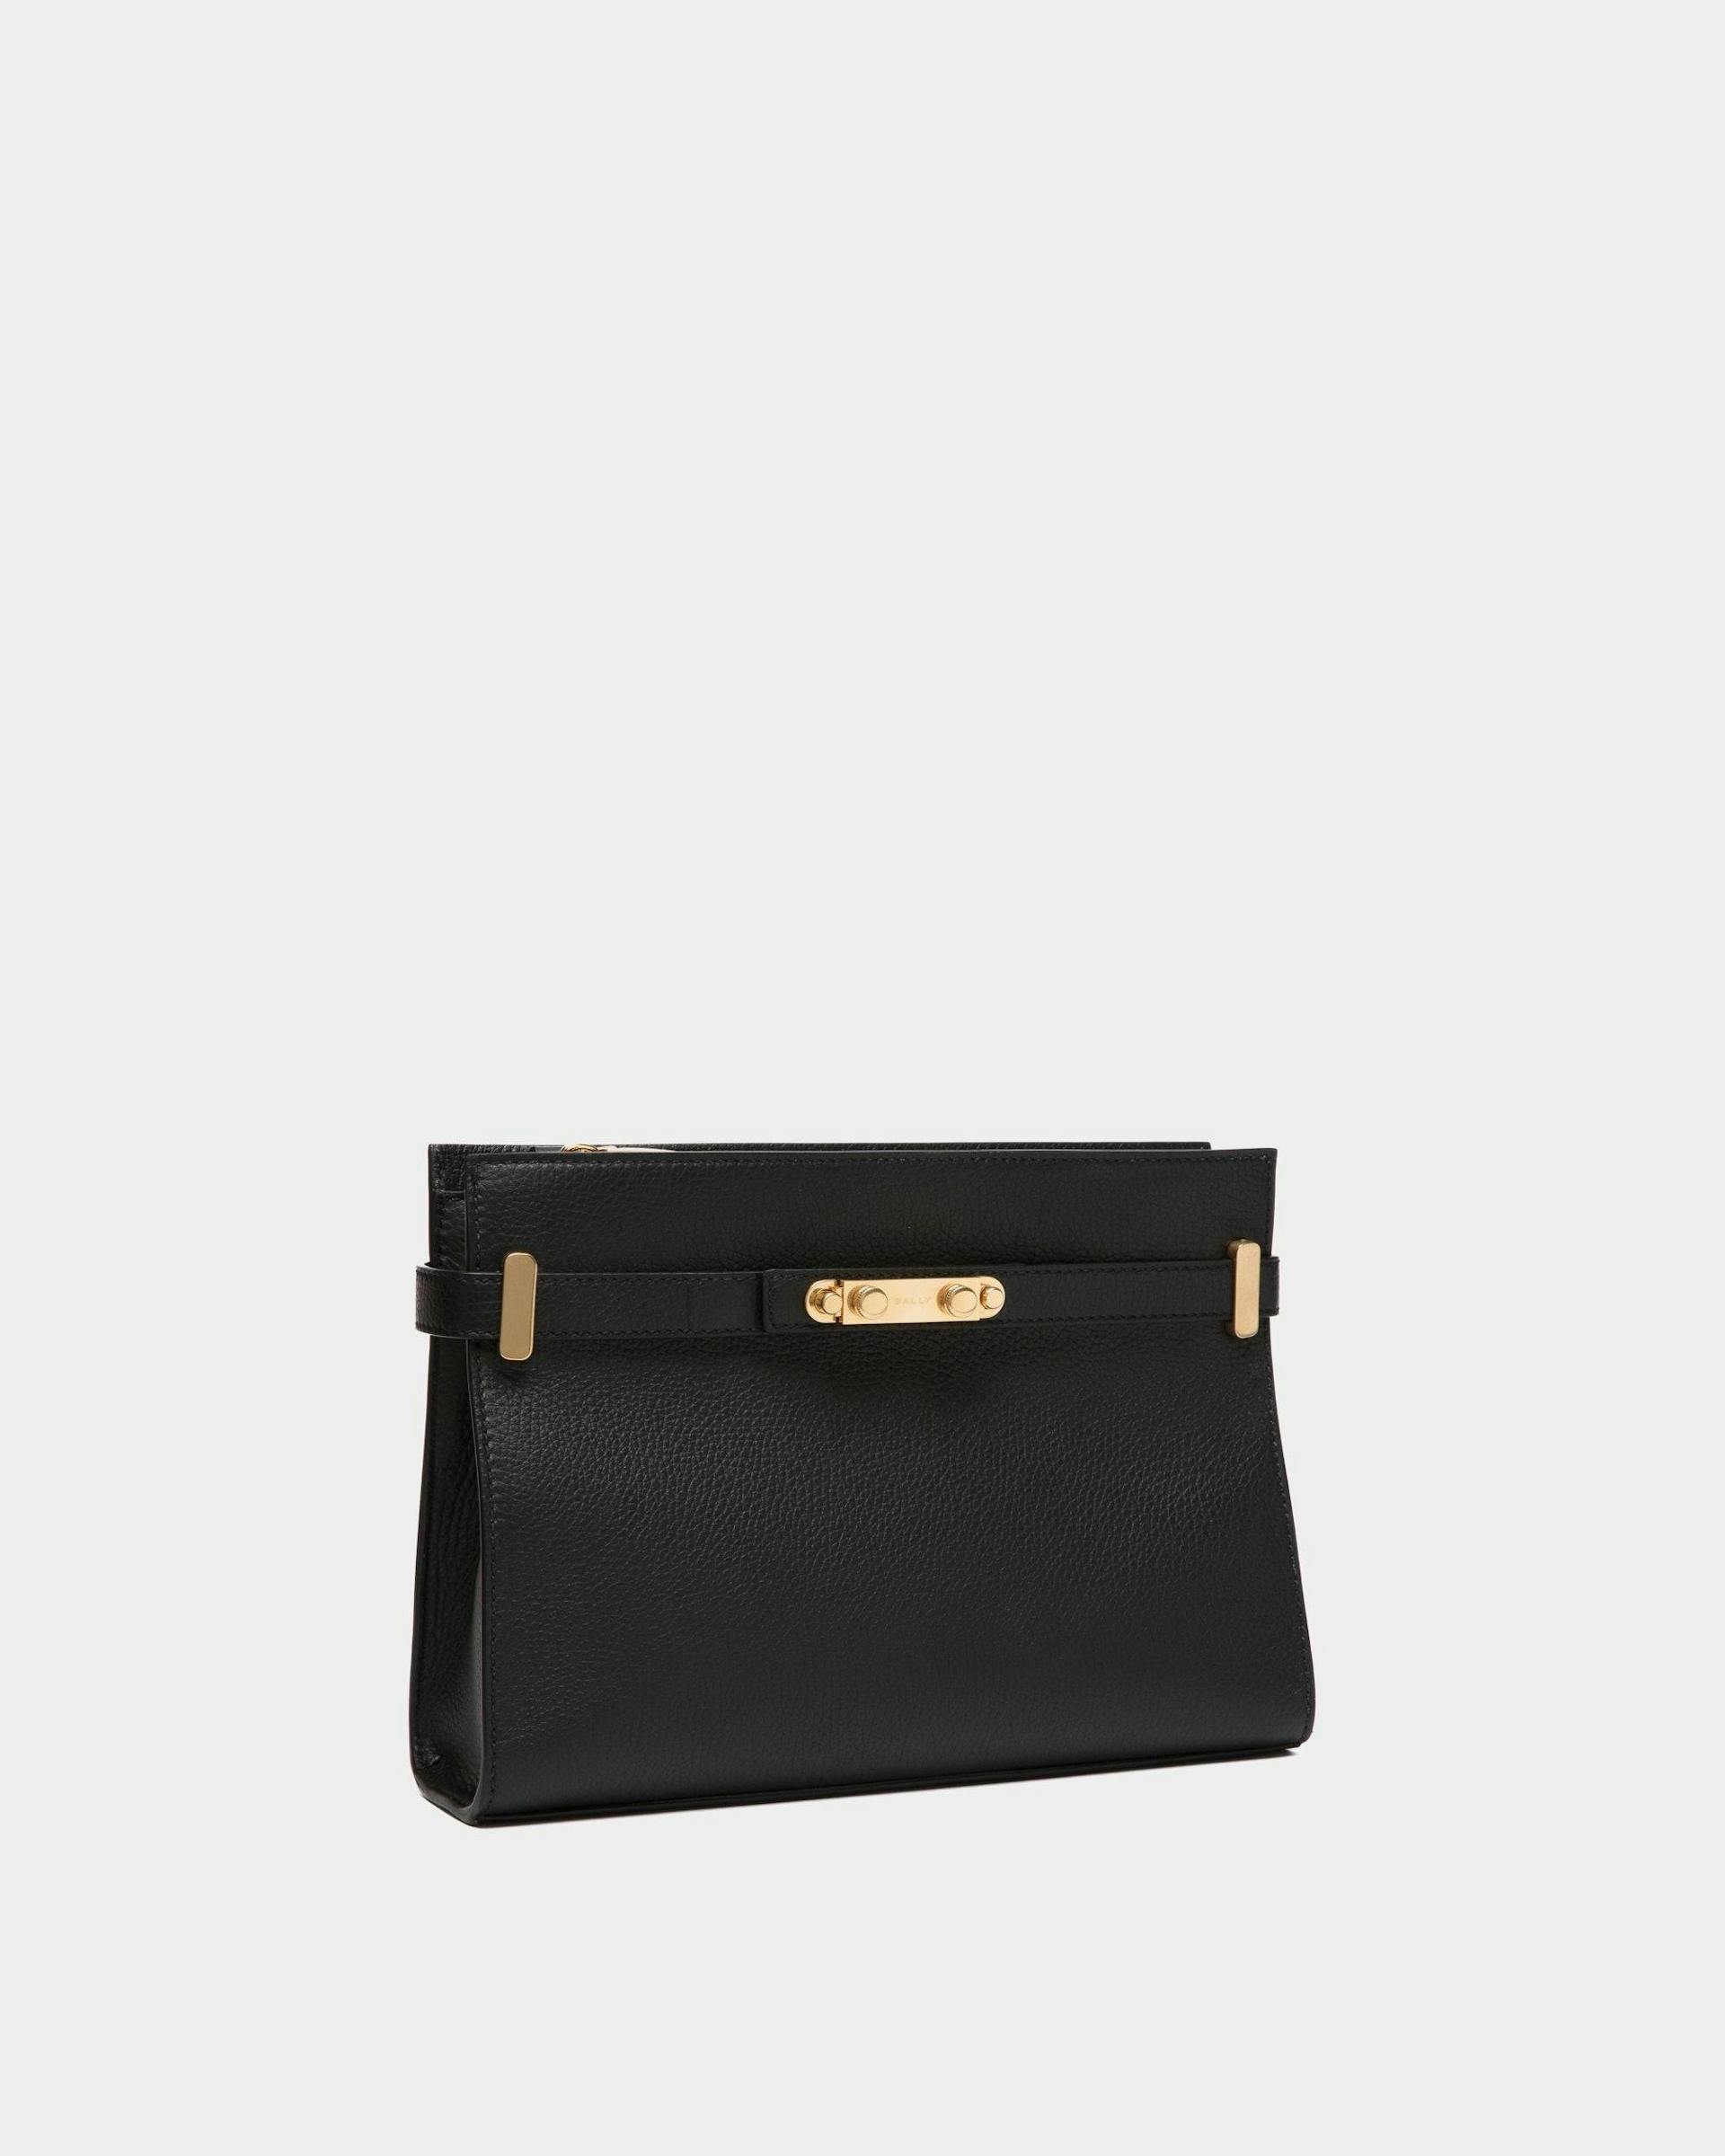 Women's Carriage Shoulder Bag in Black Grained Leather | Bally | Still Life 3/4 Front